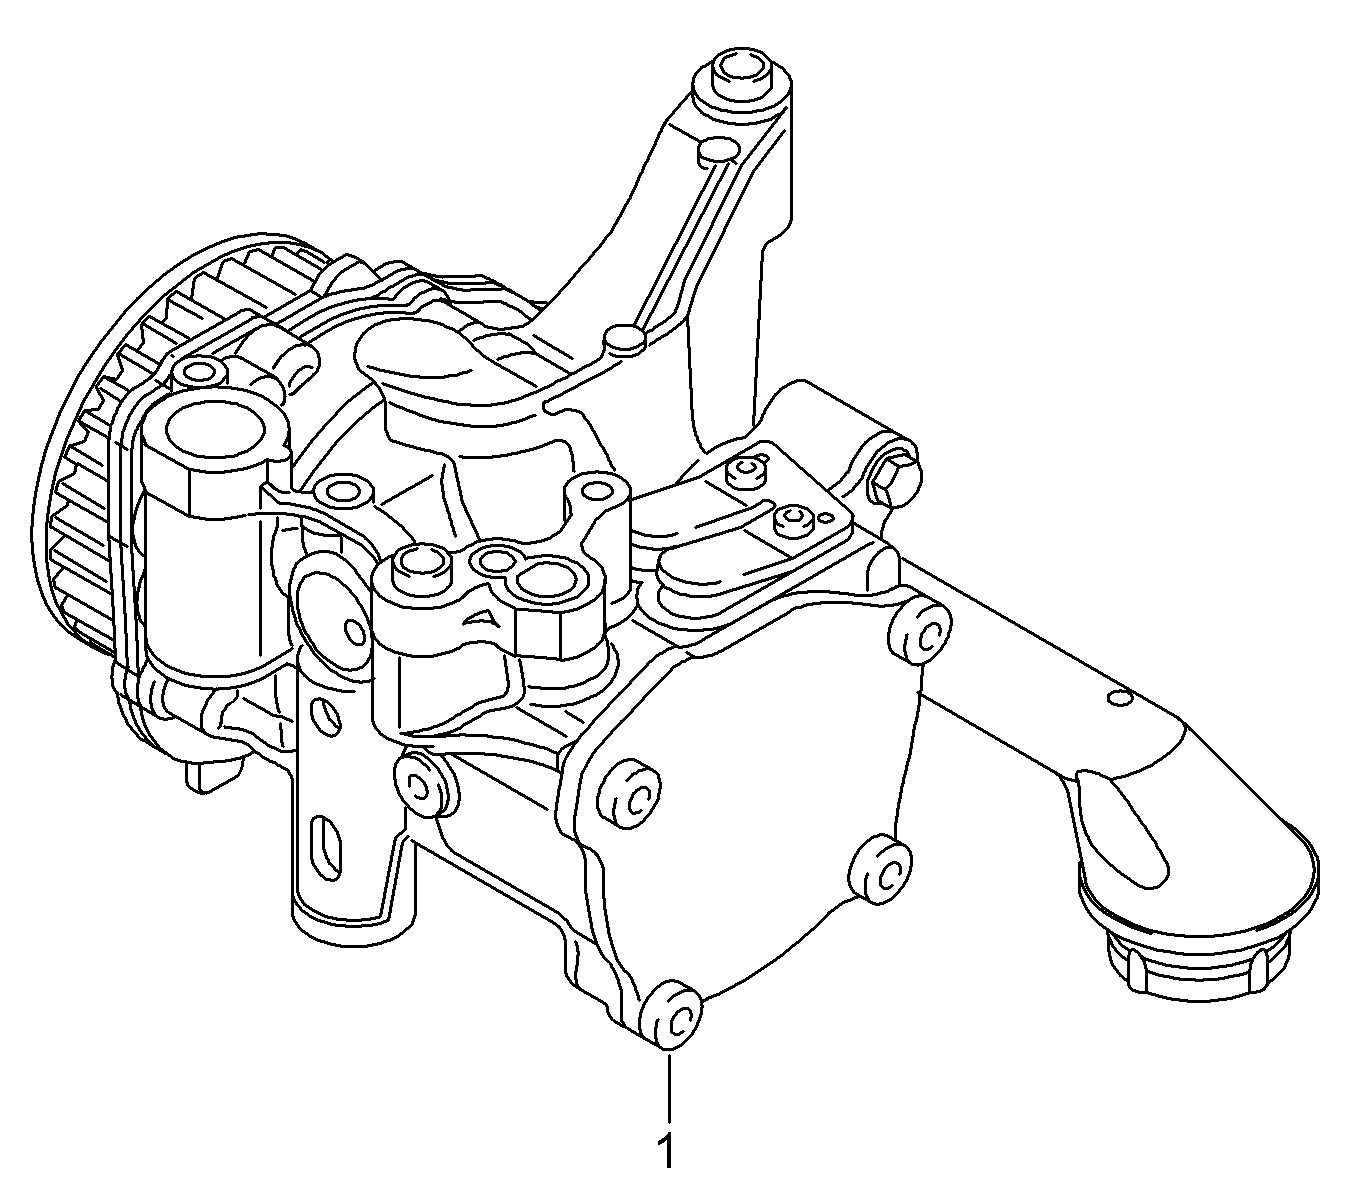 Oil pump with integrated<br>vacuum pump 2.0 Ltr. - Beetle Cabrio - bec